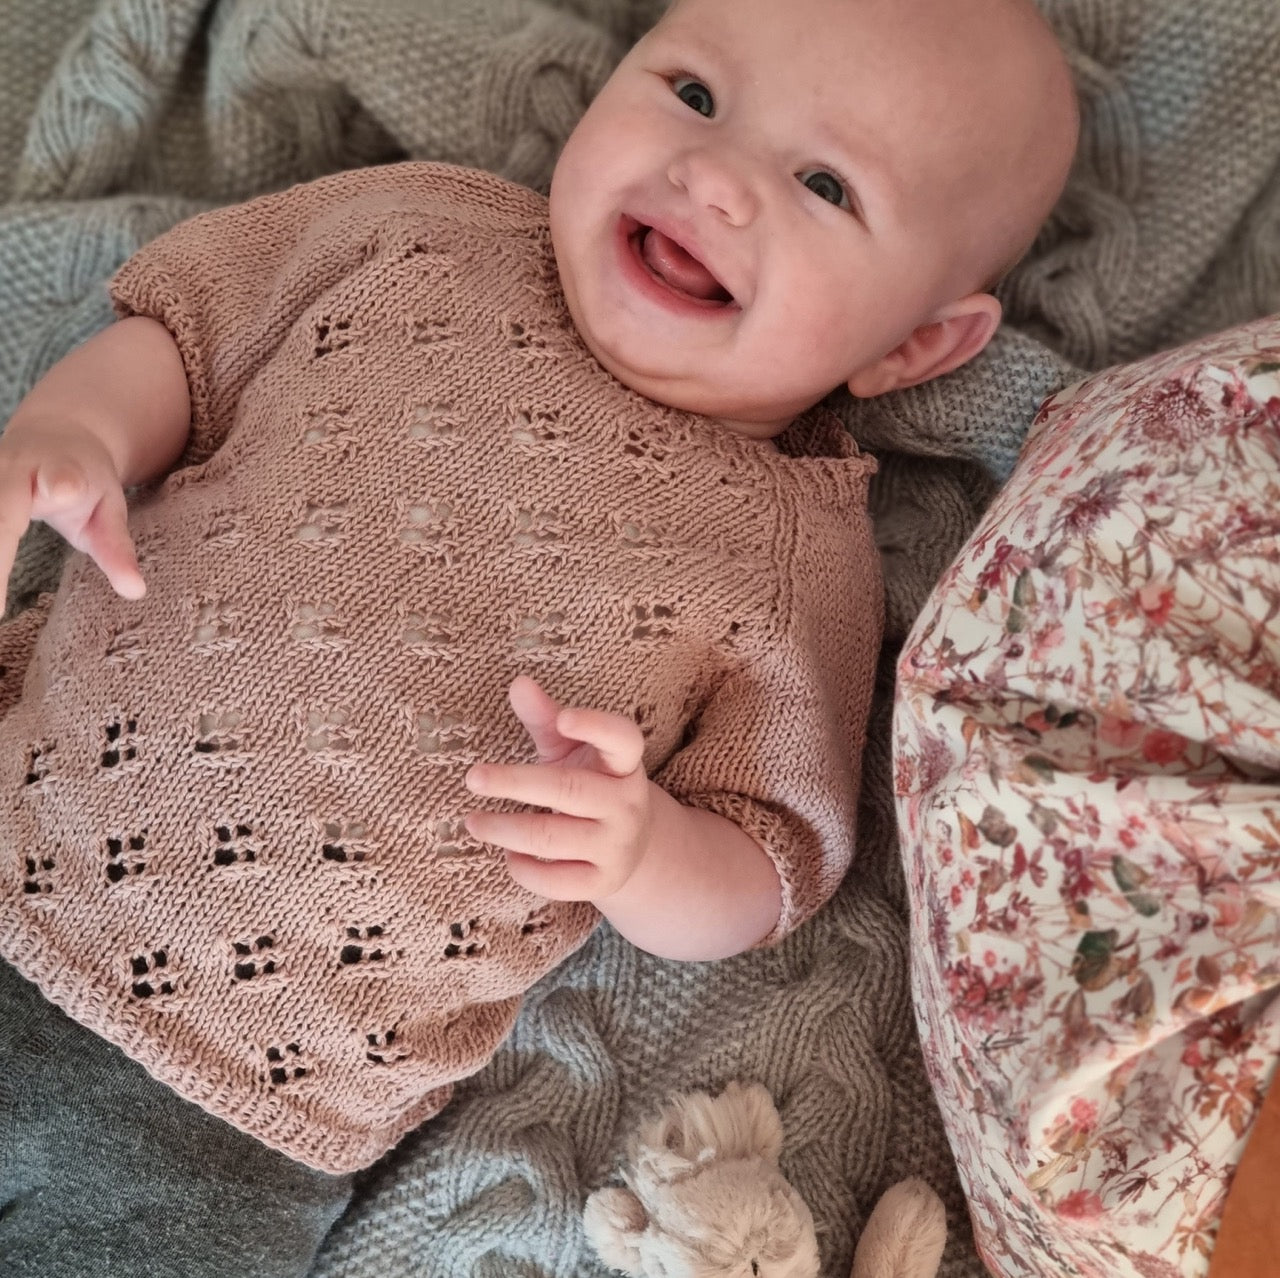 Knitted baby | Find your knitting kit for knits